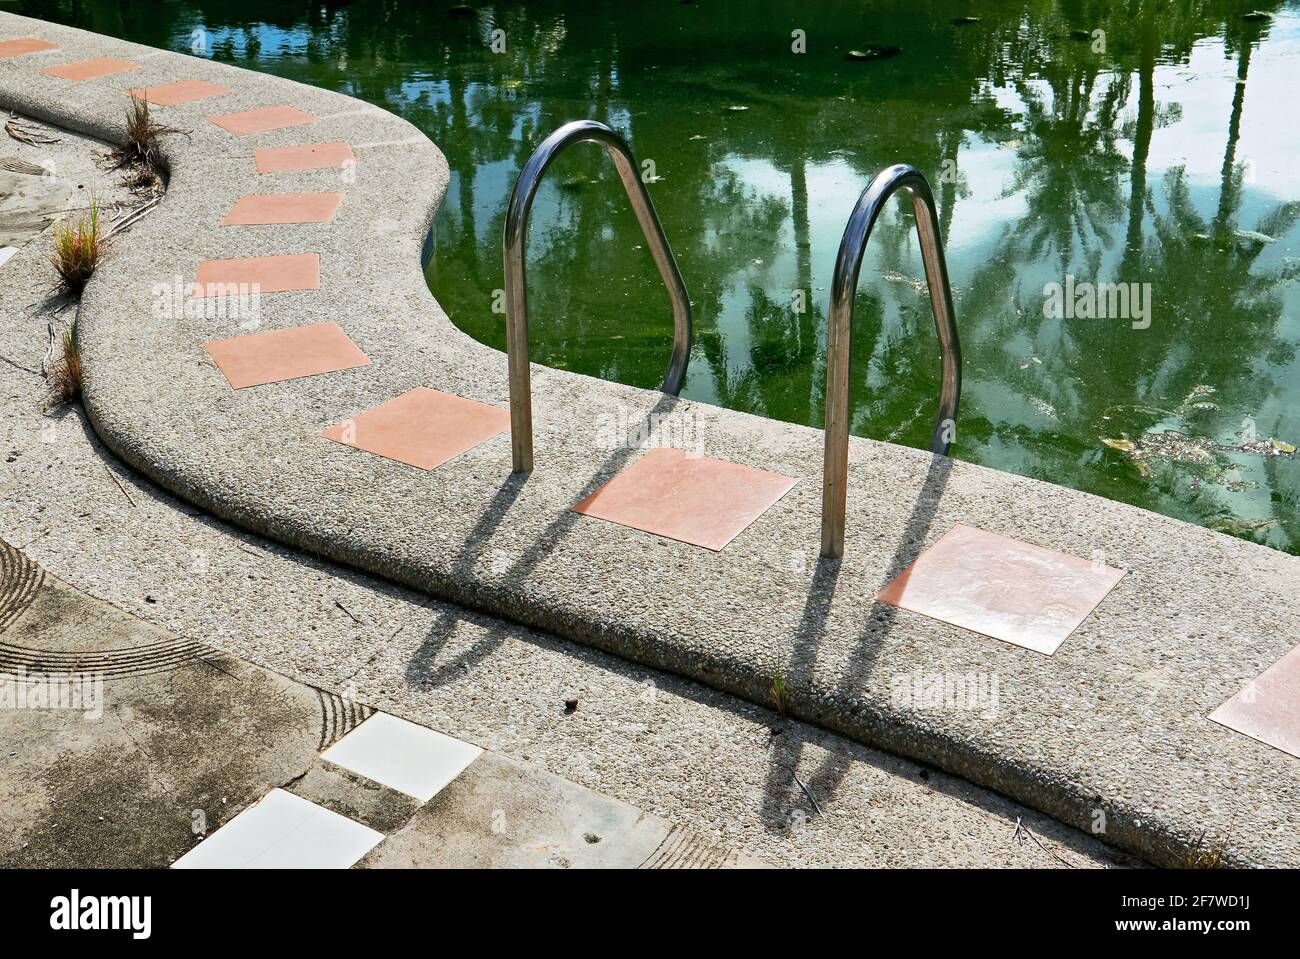 Close-up scene of an unmaintained dirty swimming pool, algae, leafs and grass visible; Hotel closures on Boracay Island during the covid pandemic Stock Photo